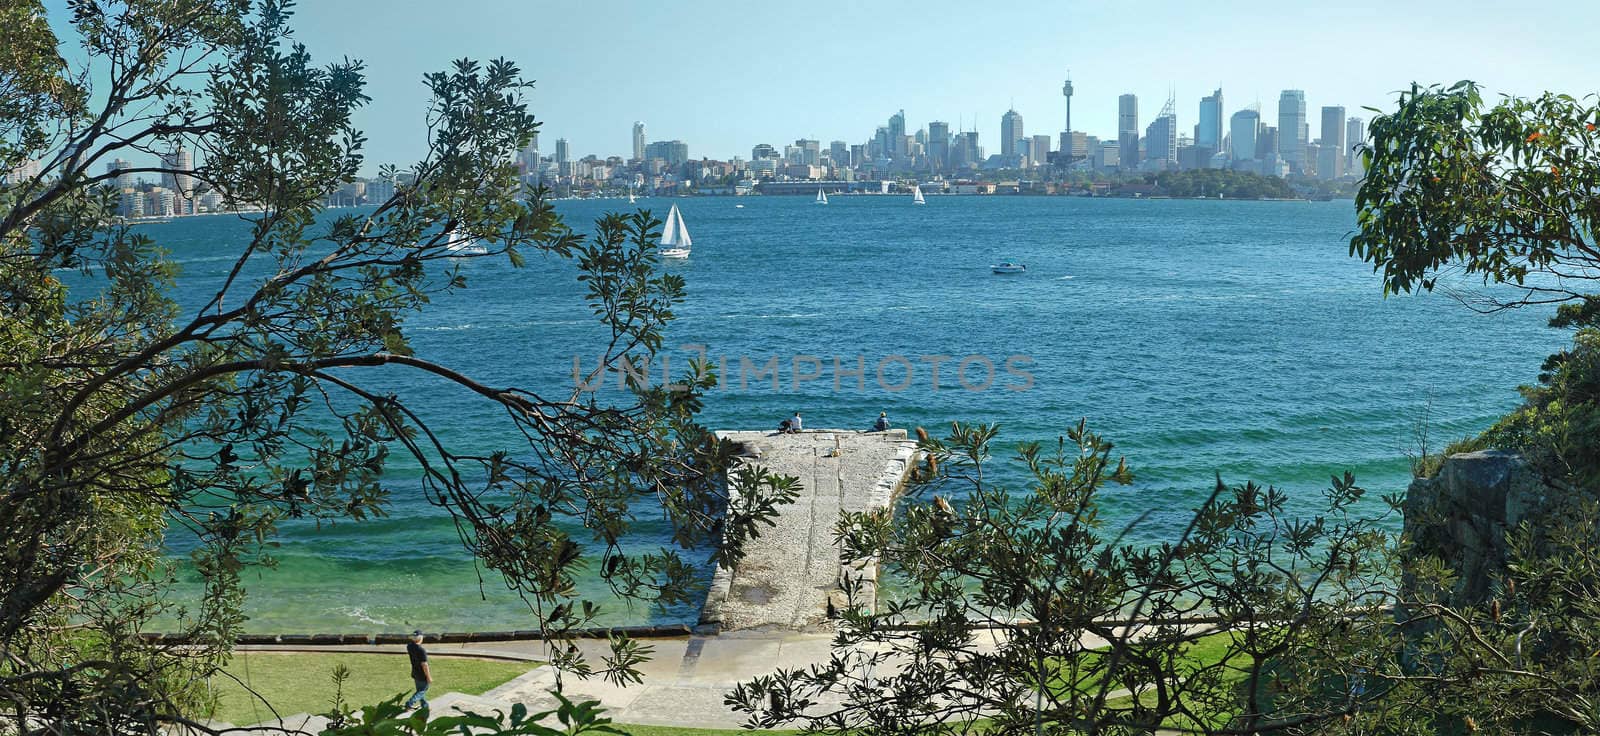 panorama of sydney skyline, boats in water, trees in foreground